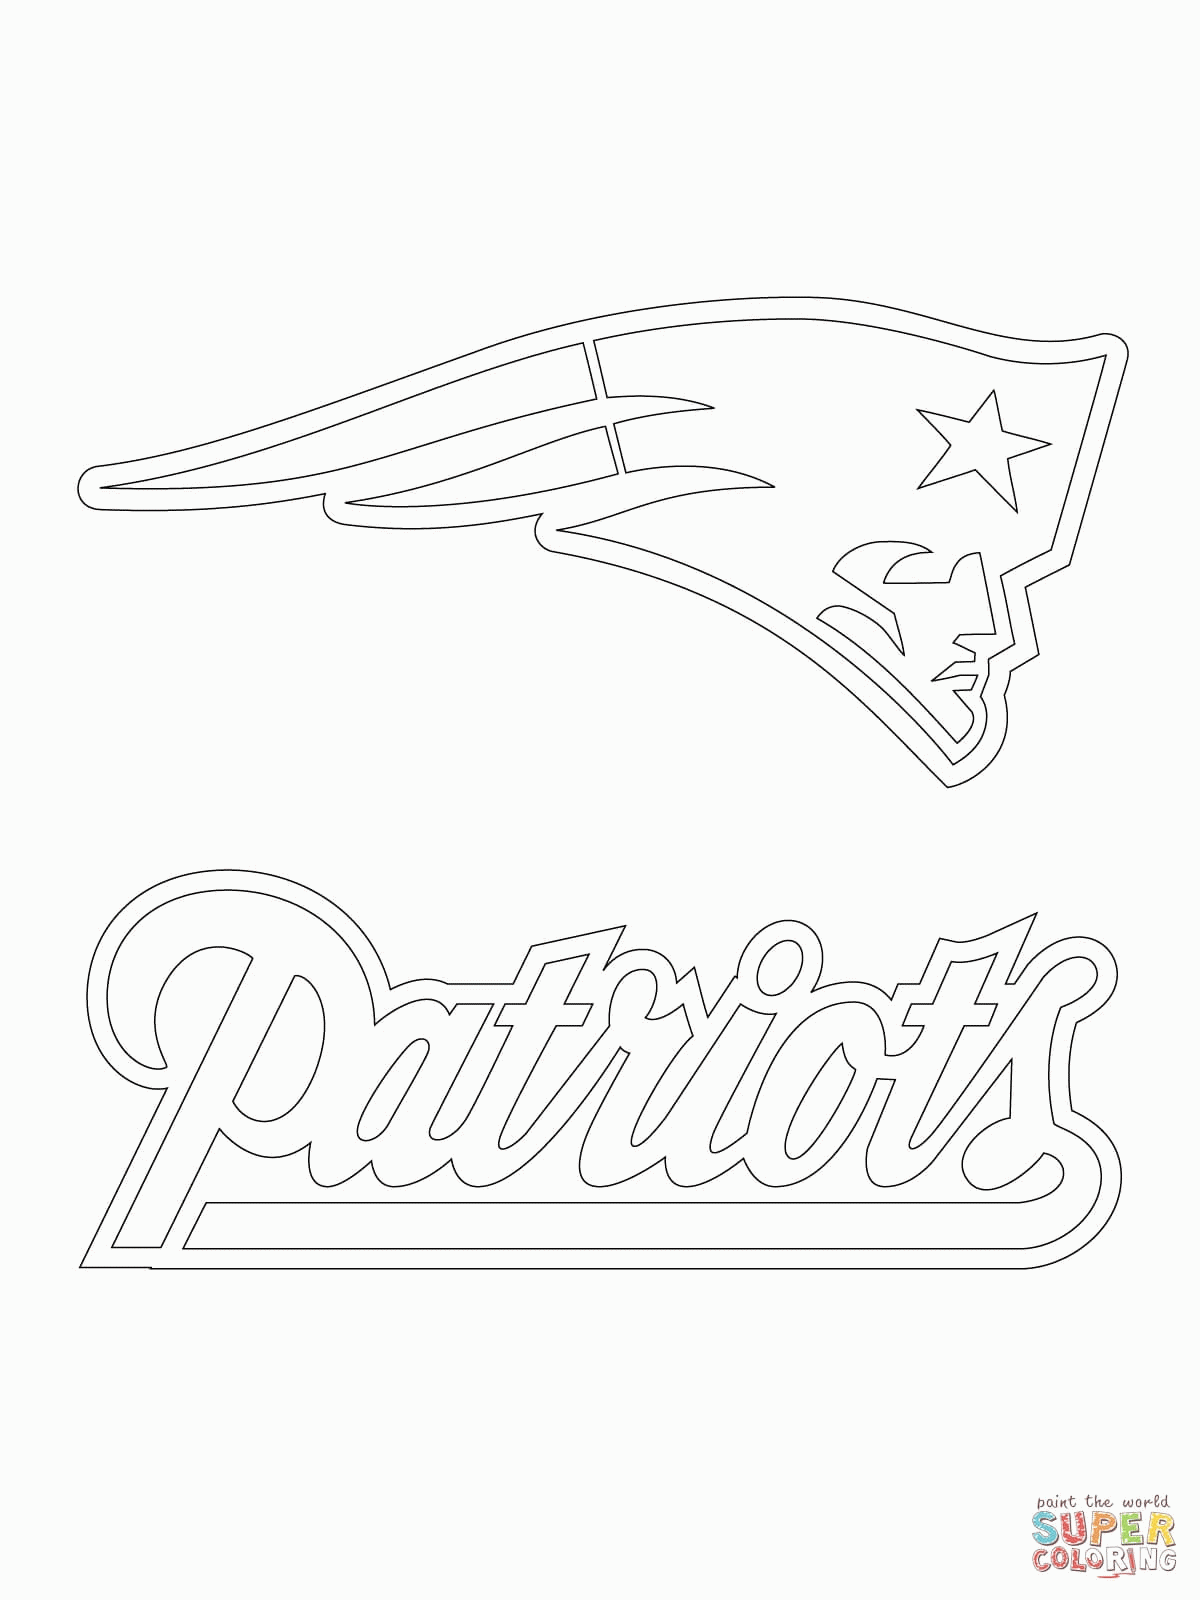 New Green Bay Packers Logo Coloring Page Free Printable Coloring ...